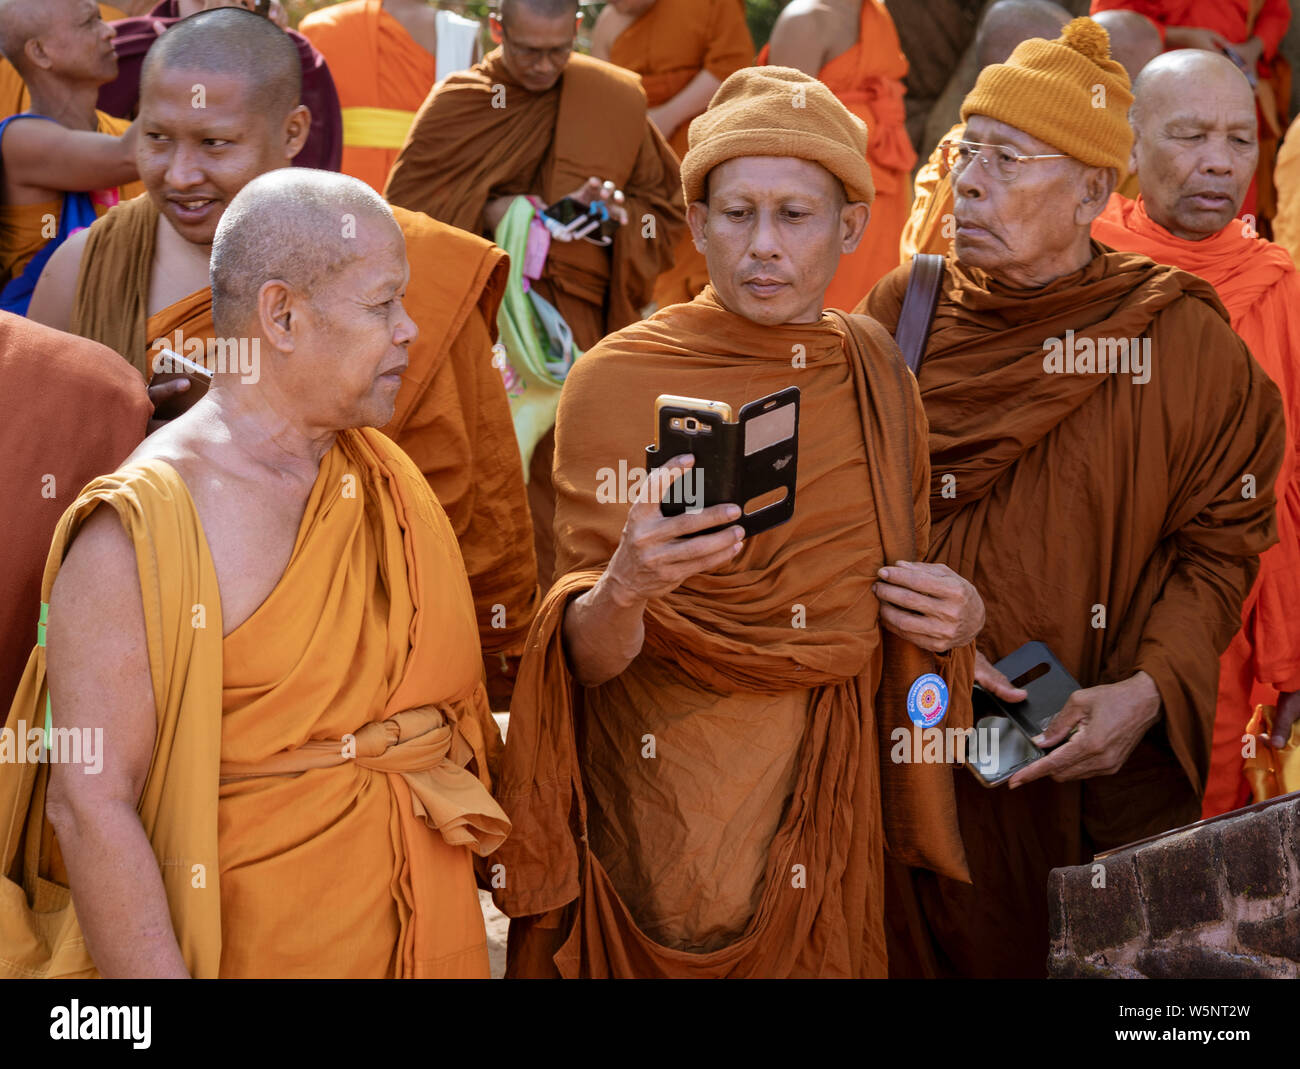 Negombo, Sri Lanka - 2019-03-22 - Monks Gather Together and a Phone Camera Comes Out. Stock Photo